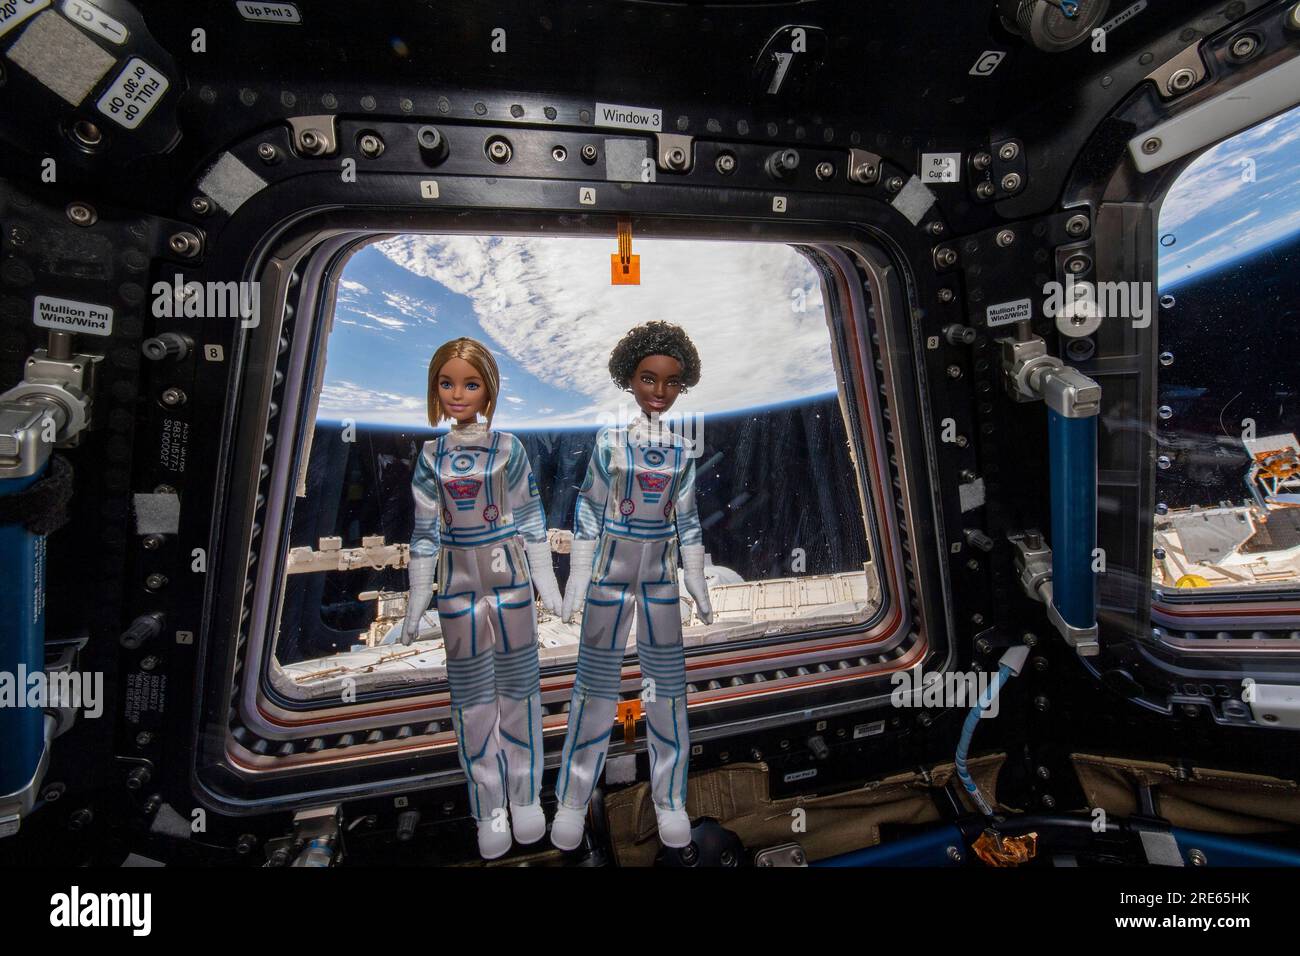 International Space Station, Earth Orbit. 14 April, 2022. Two Barbie dolls with the Mattel Space Discovery line wearing white spacesuits with pink and blue detailing float in microgravity inside the Cupola of the International Space Station, April 14, 2022 in Earth Orbit. The journey of Barbie into space was part of Mission DreamStar, an educational outreach project by Mattel that introduces young girls to careers in STEM fields. Credit: International Space Station/NASA/Alamy Live News Stock Photo